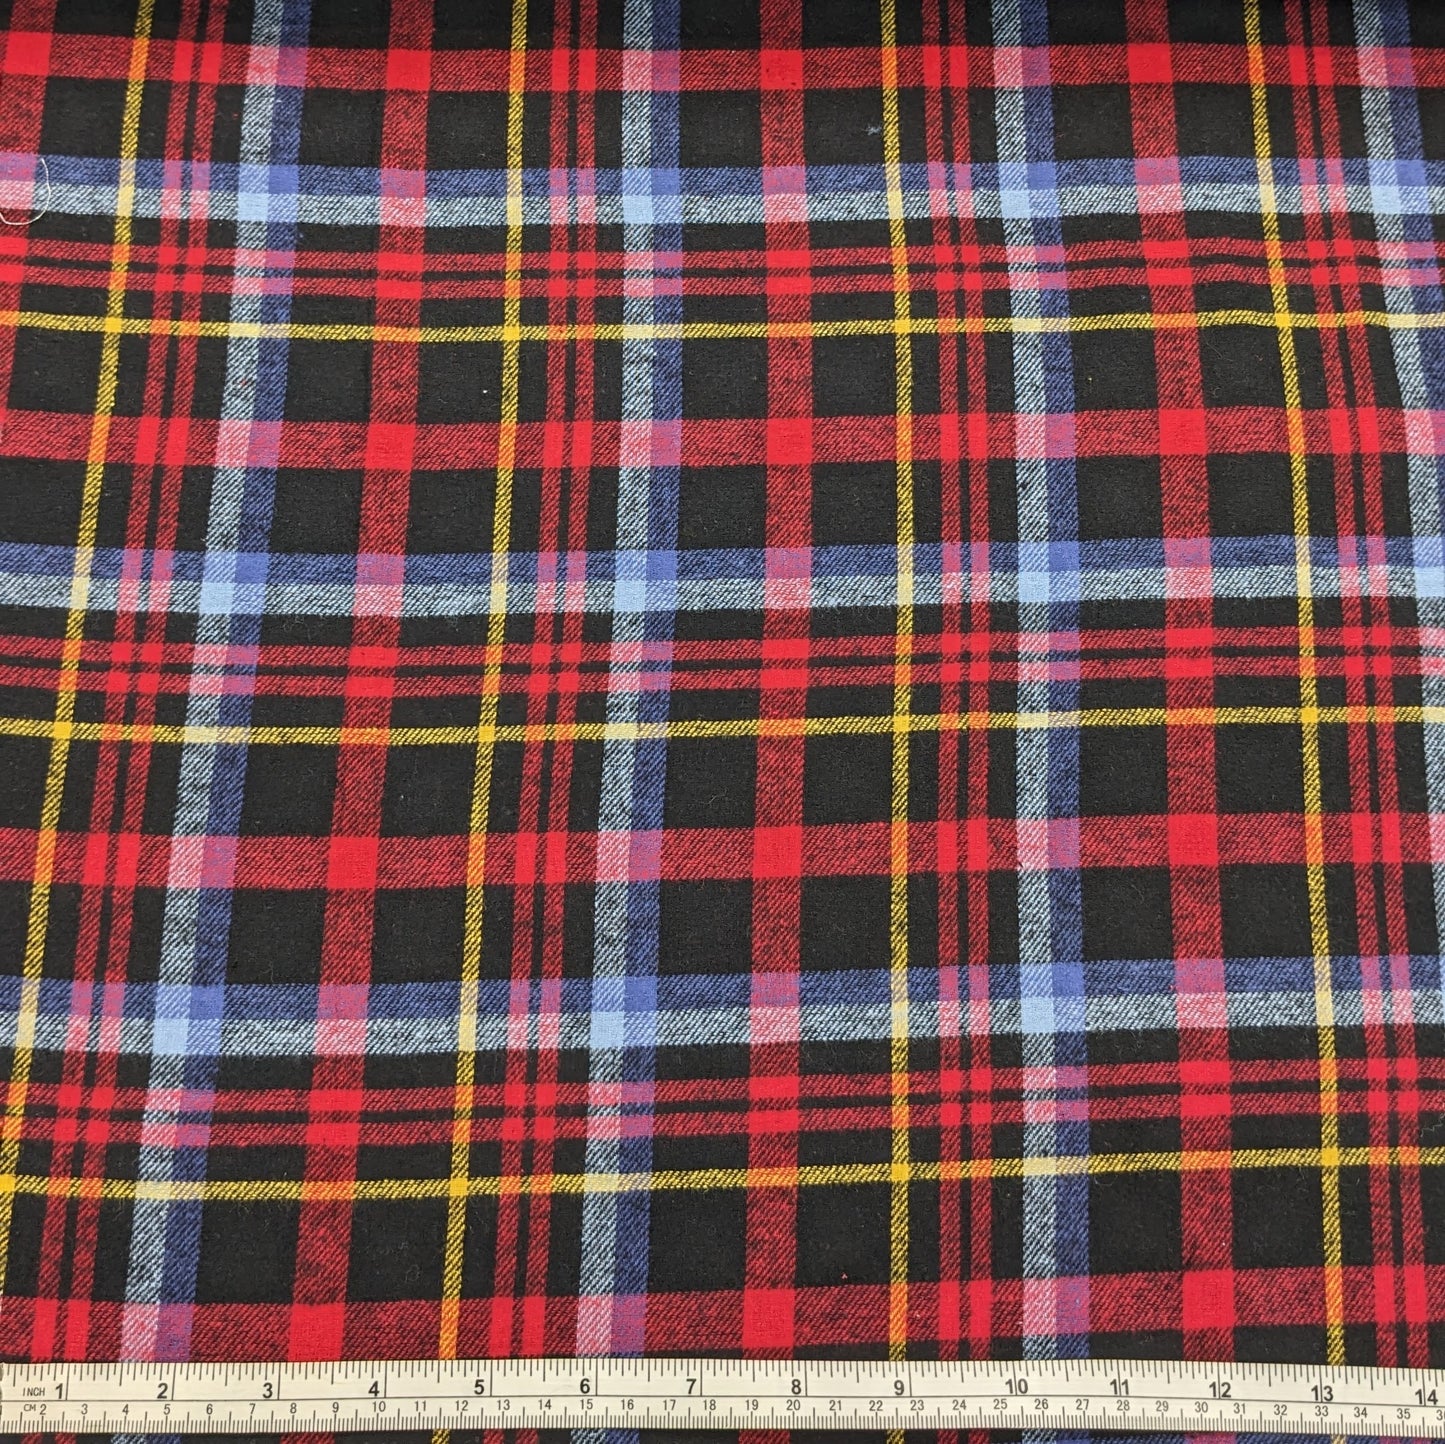 Brushed Cotton Fabric - Pink and Blue Check - Tartan